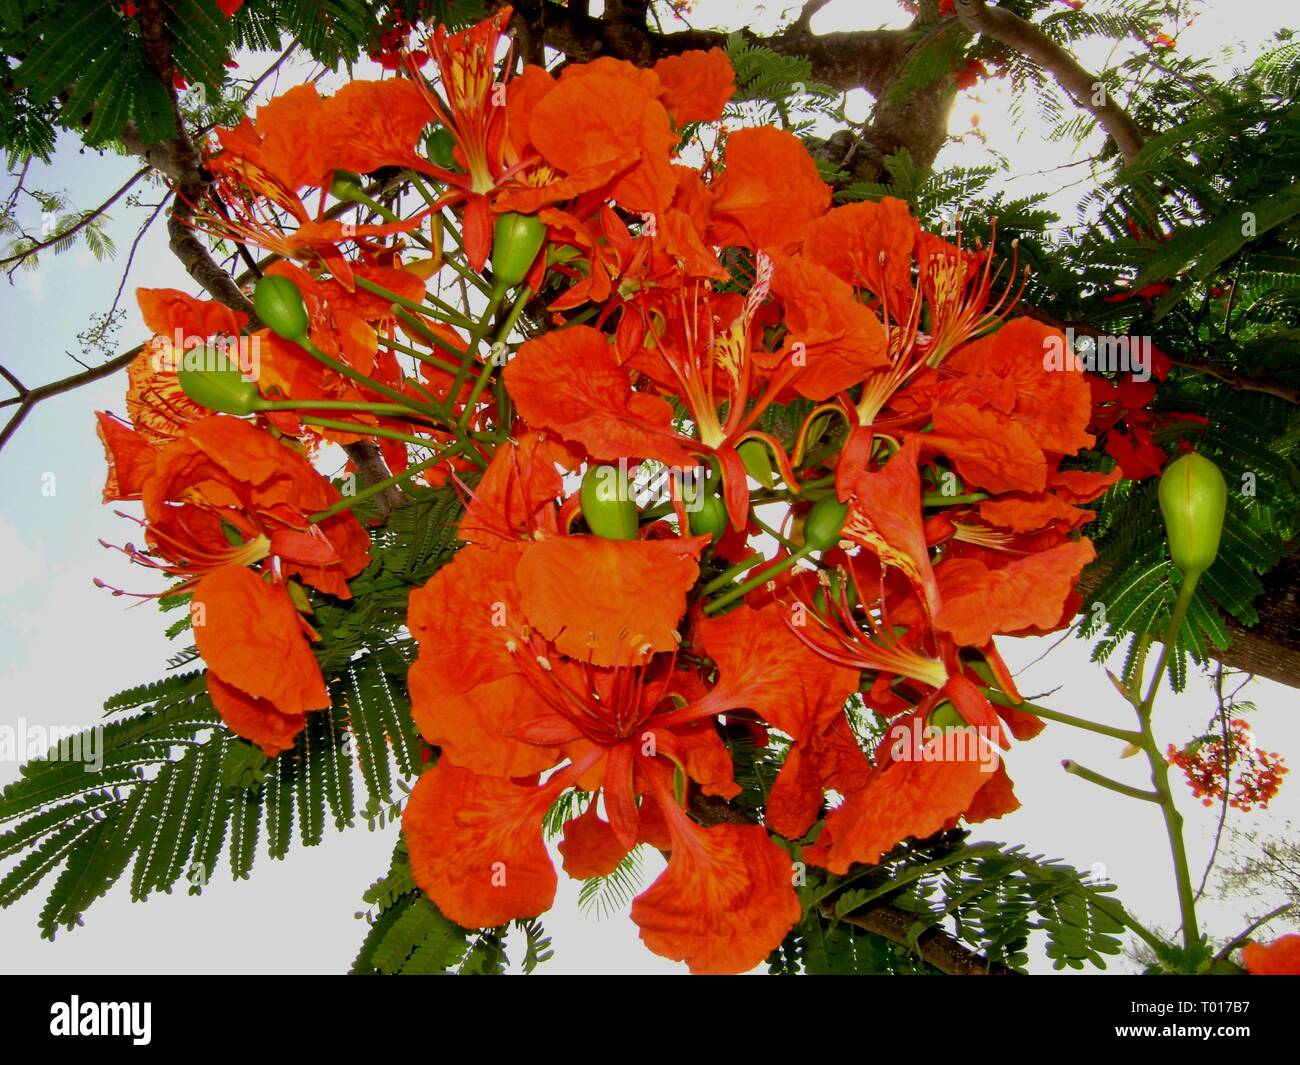 Flame tree flowers, also called royal poinciana tree red or flamboyant flowers are regarded as one of the most beautiful tropical flowers on earth. Stock Photo